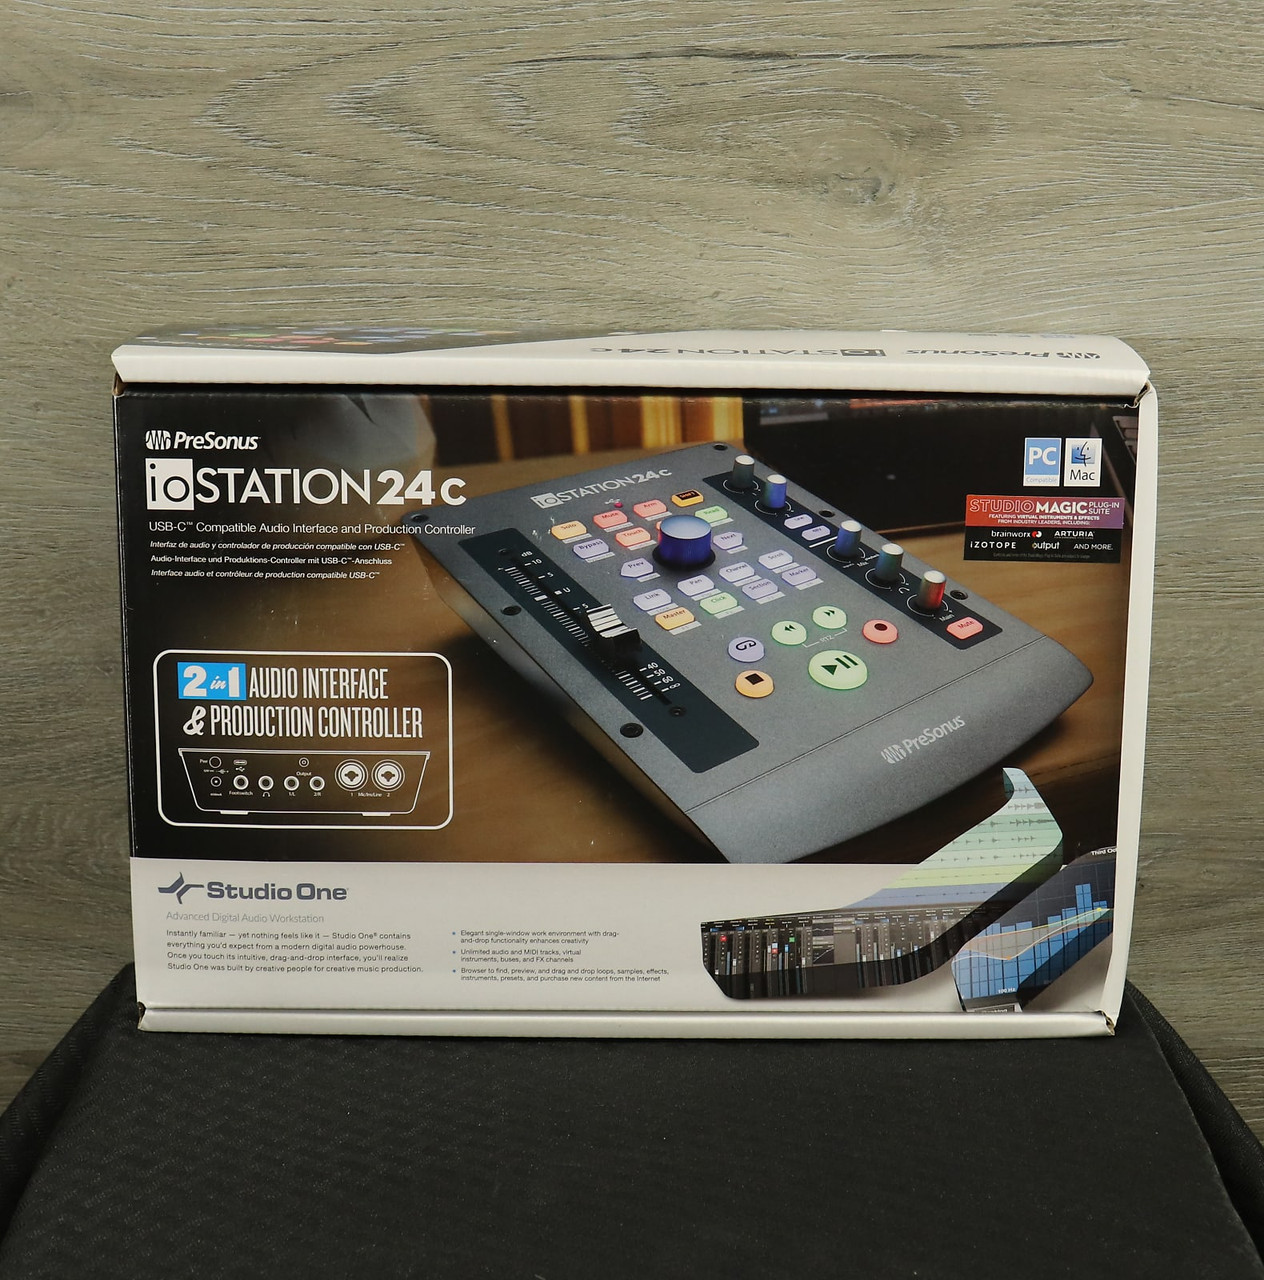 PreSonus ioStation 24c 2x2, 192 kHz, USB Audio Interface and Production  Controller with Studio One Artist and Ableton Live Lite DAW Recording  Software